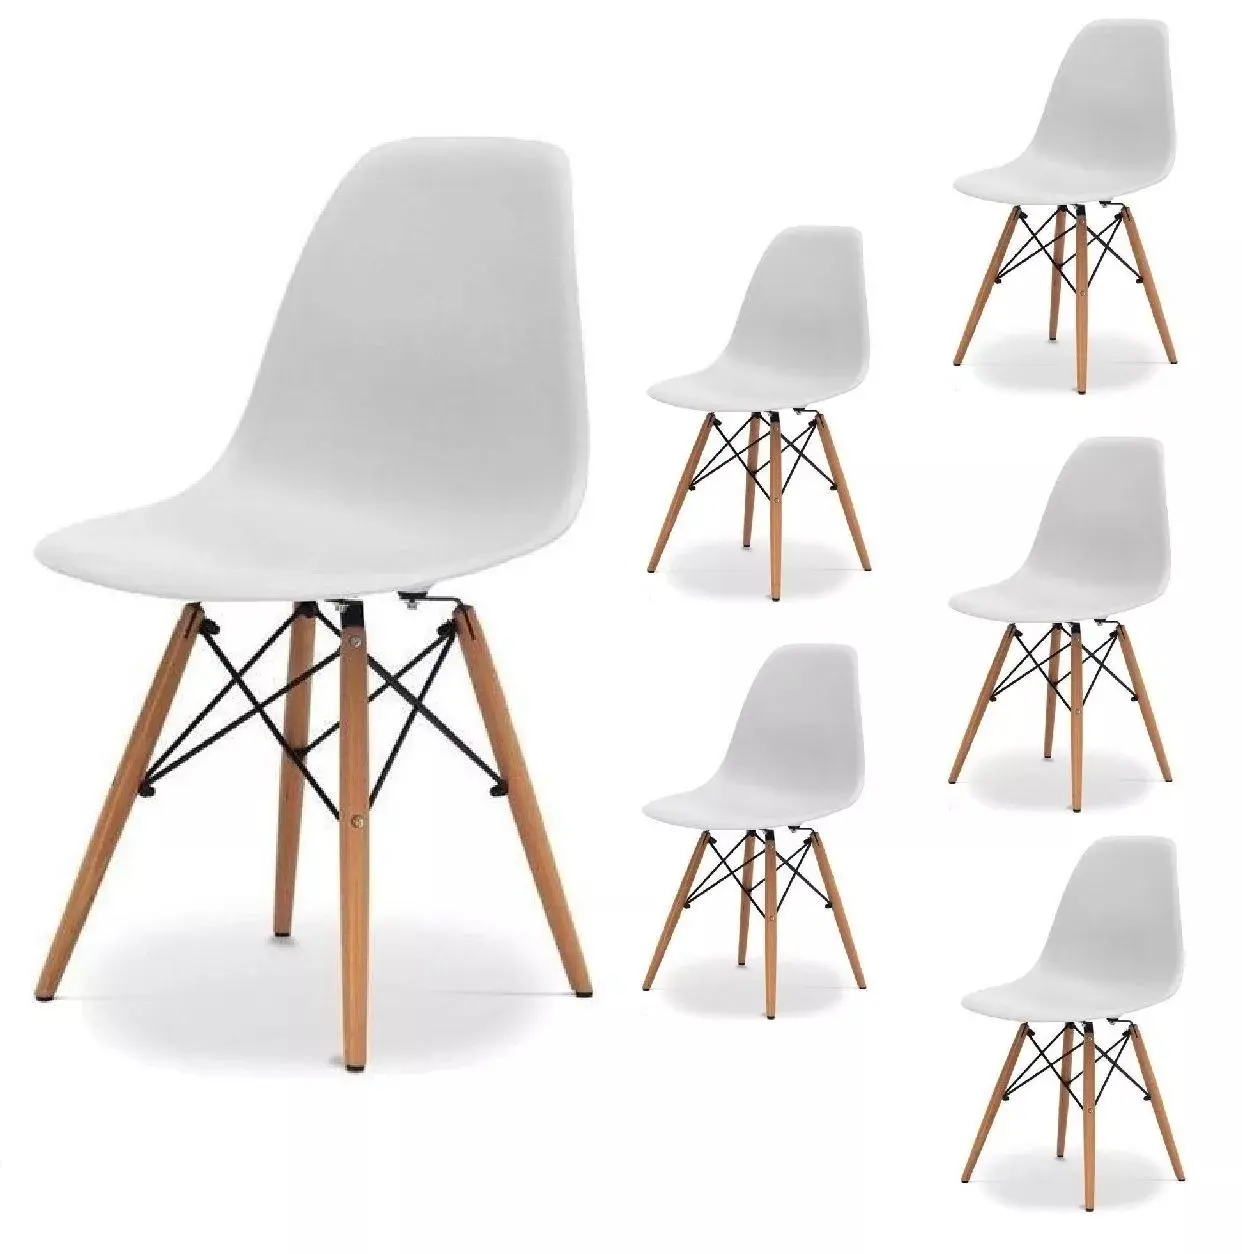 Hot Sale Cheap Contemporary Modern Dinning Chair Cadeira Dinner Kitchen EAM PP Plastic Seat Dining Chairs With Wooden Legs